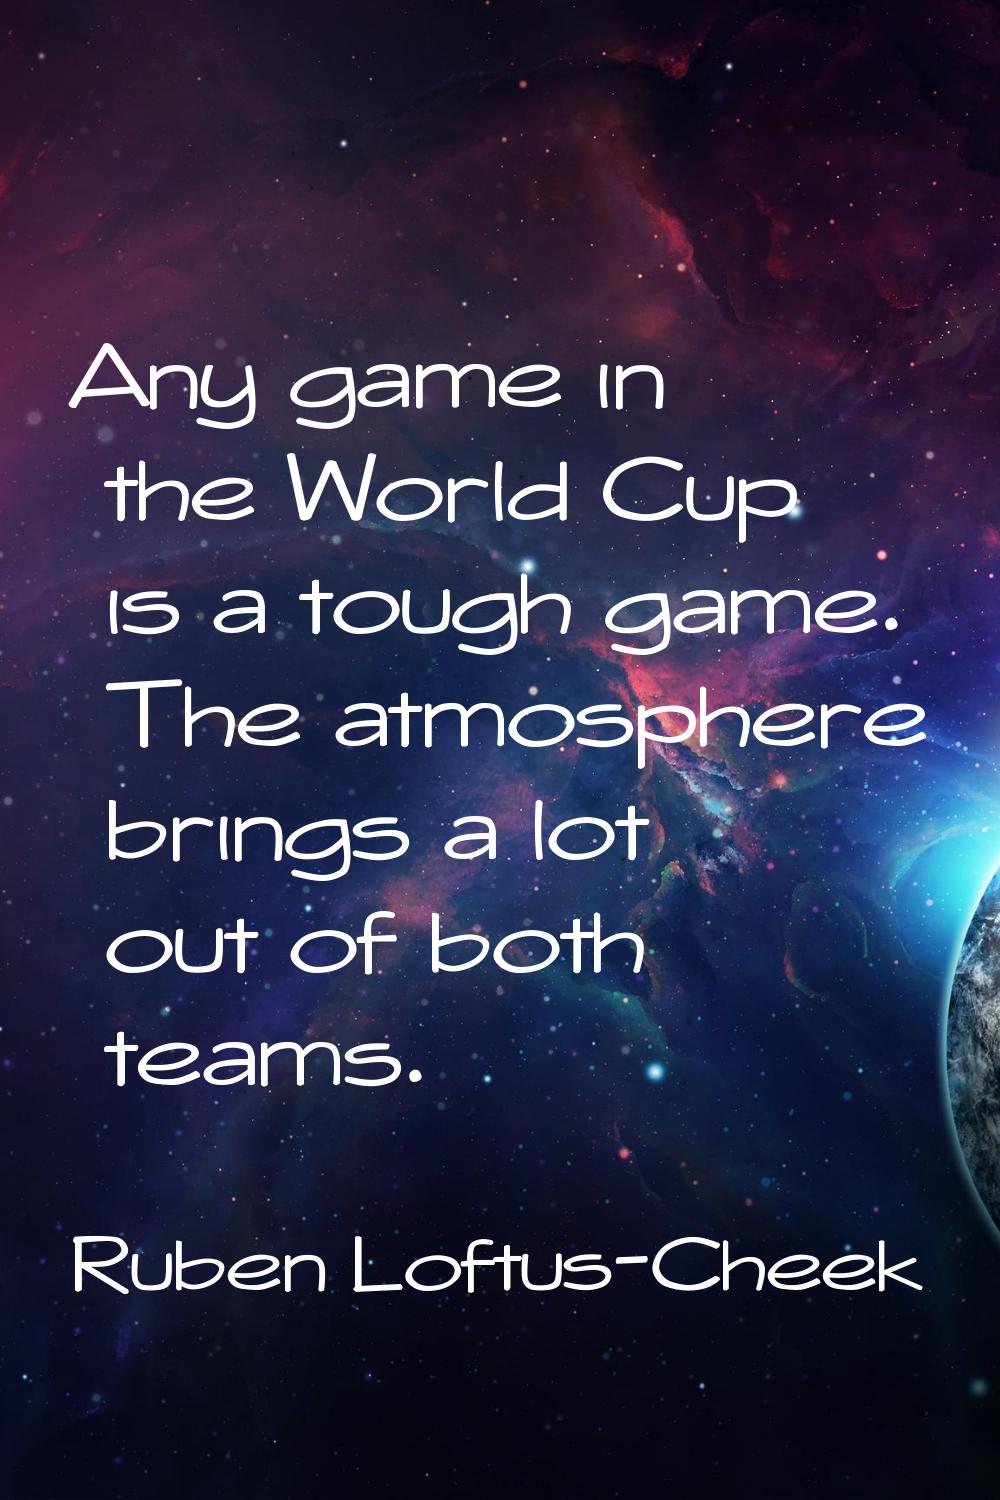 Any game in the World Cup is a tough game. The atmosphere brings a lot out of both teams.